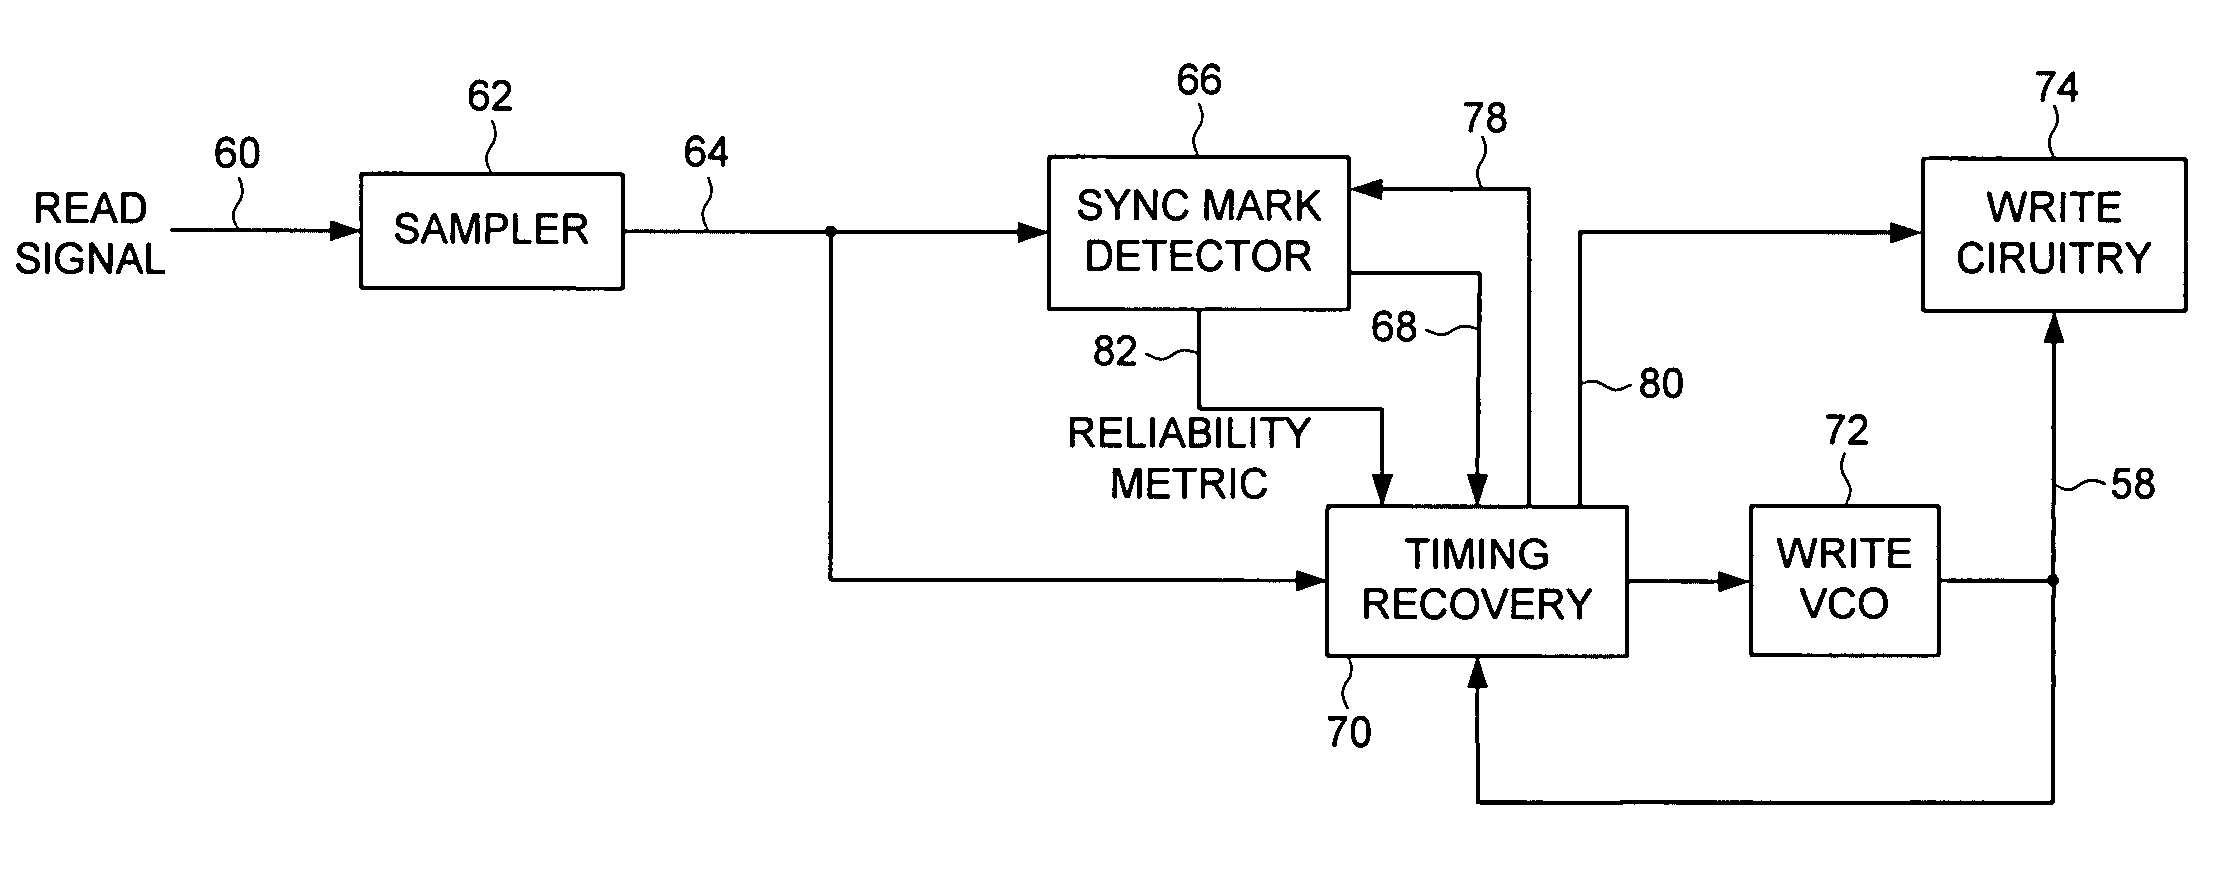 Servo writing a disk drive by synchronizing a servo write clock in response to a sync mark reliability metric